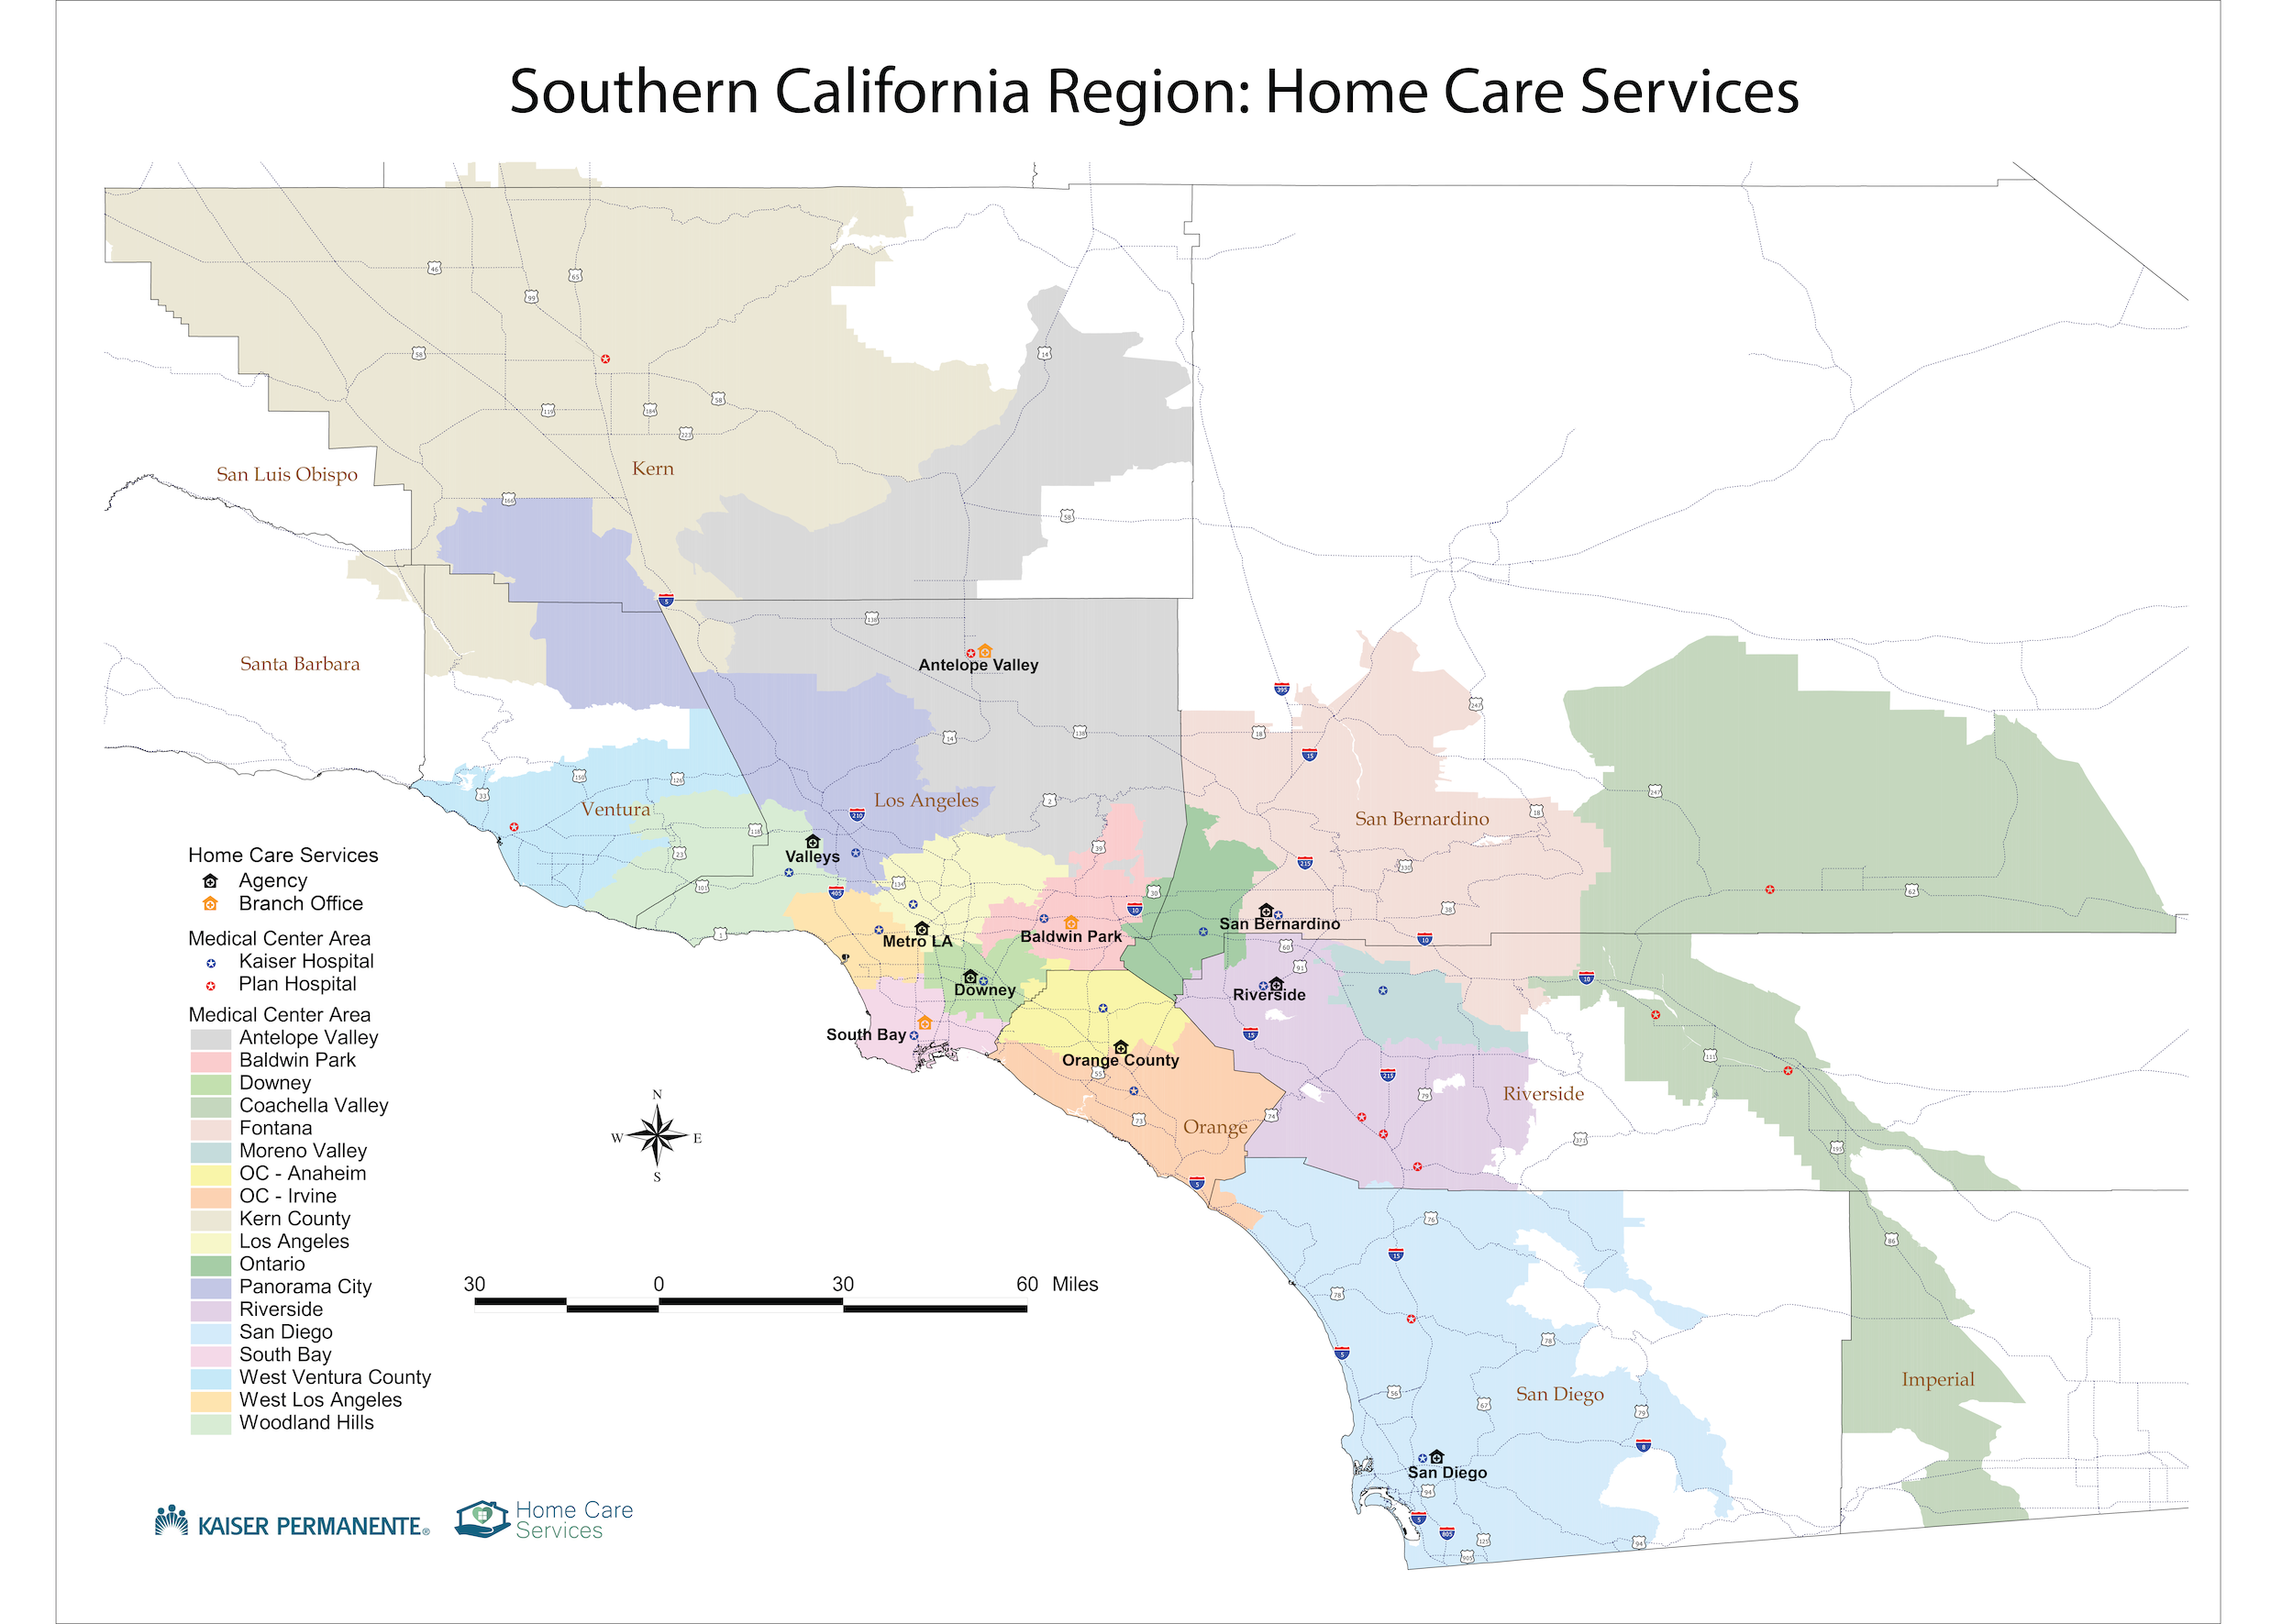 Southern California Region Home Care Services Map